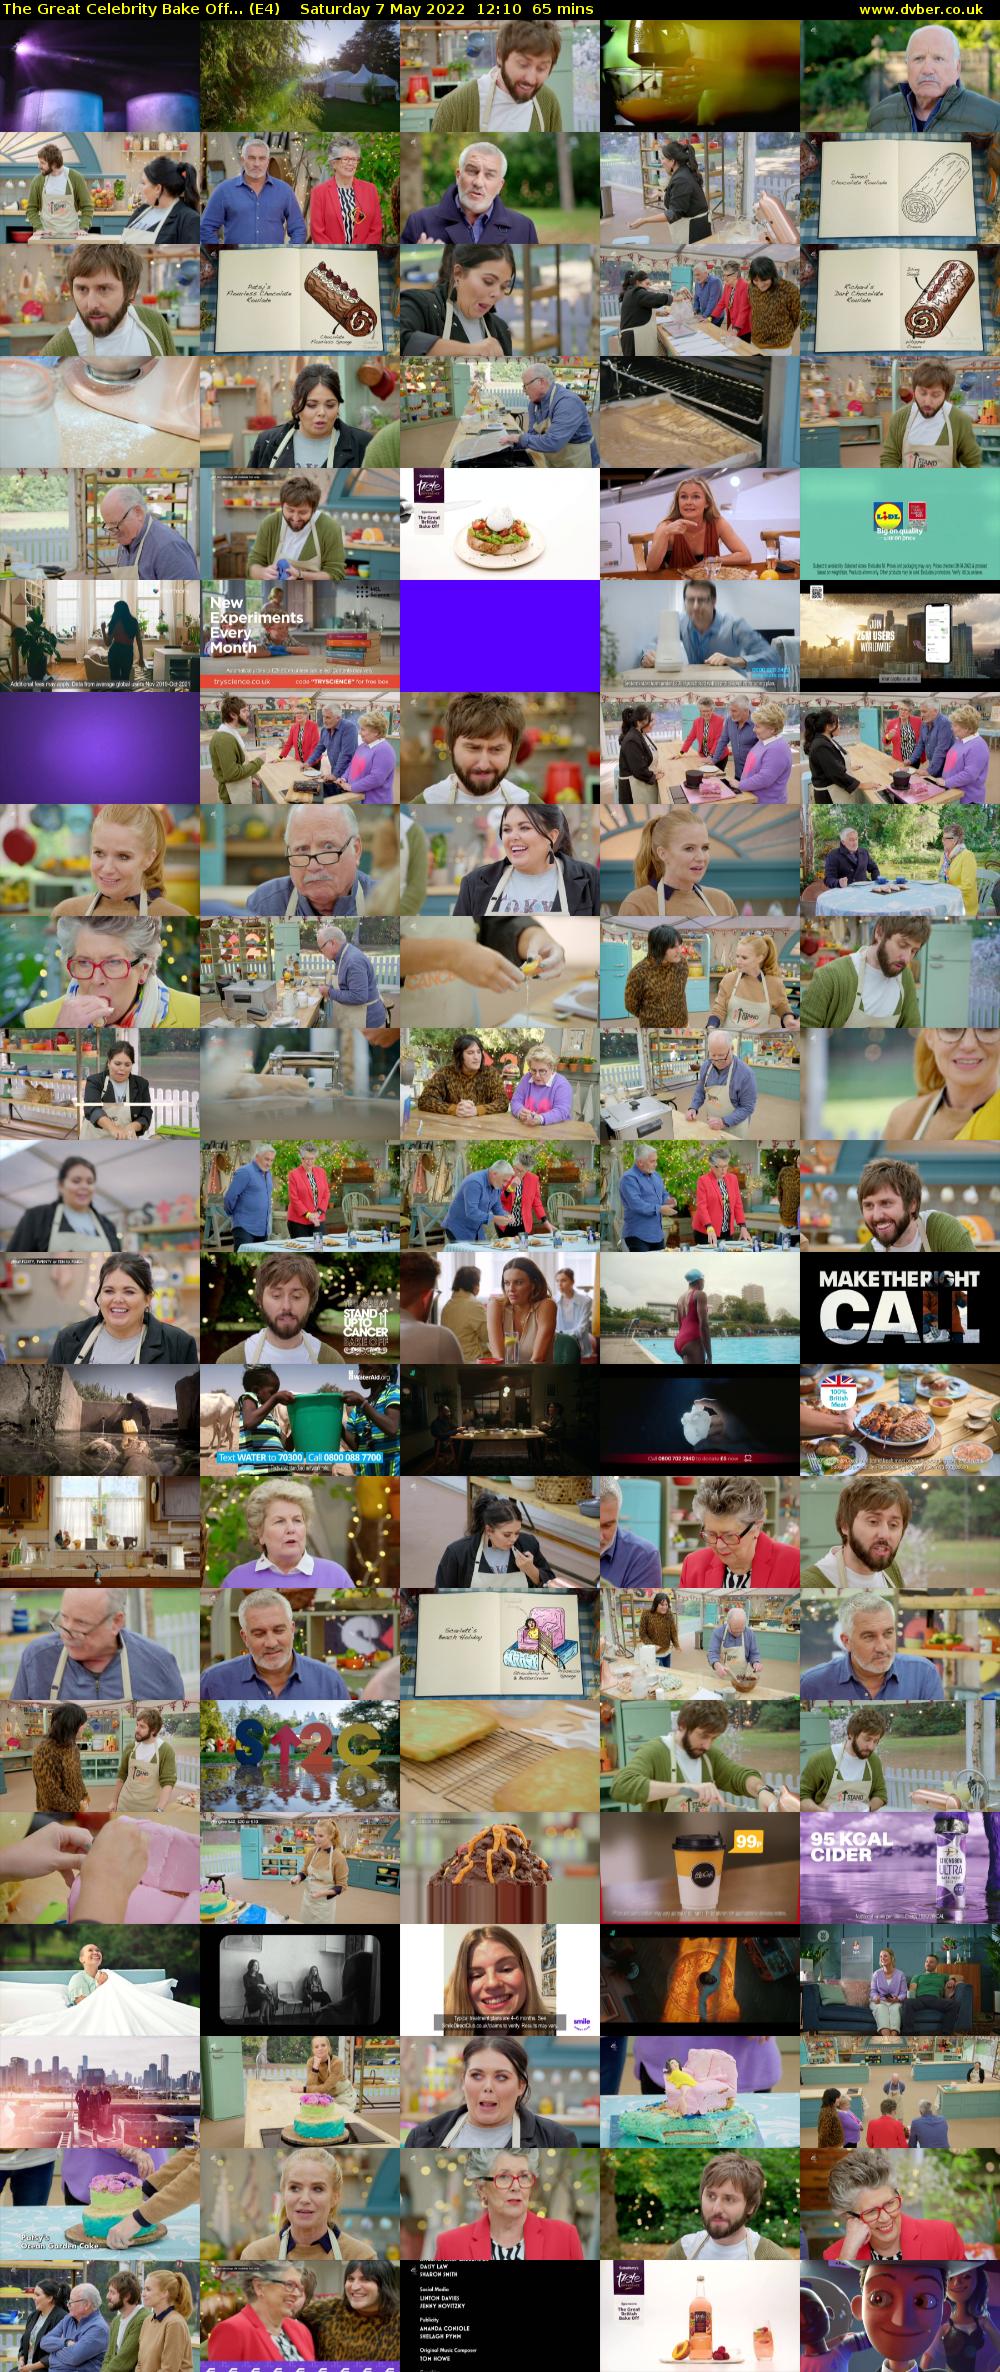 The Great Celebrity Bake Off... (E4) Saturday 7 May 2022 12:10 - 13:15